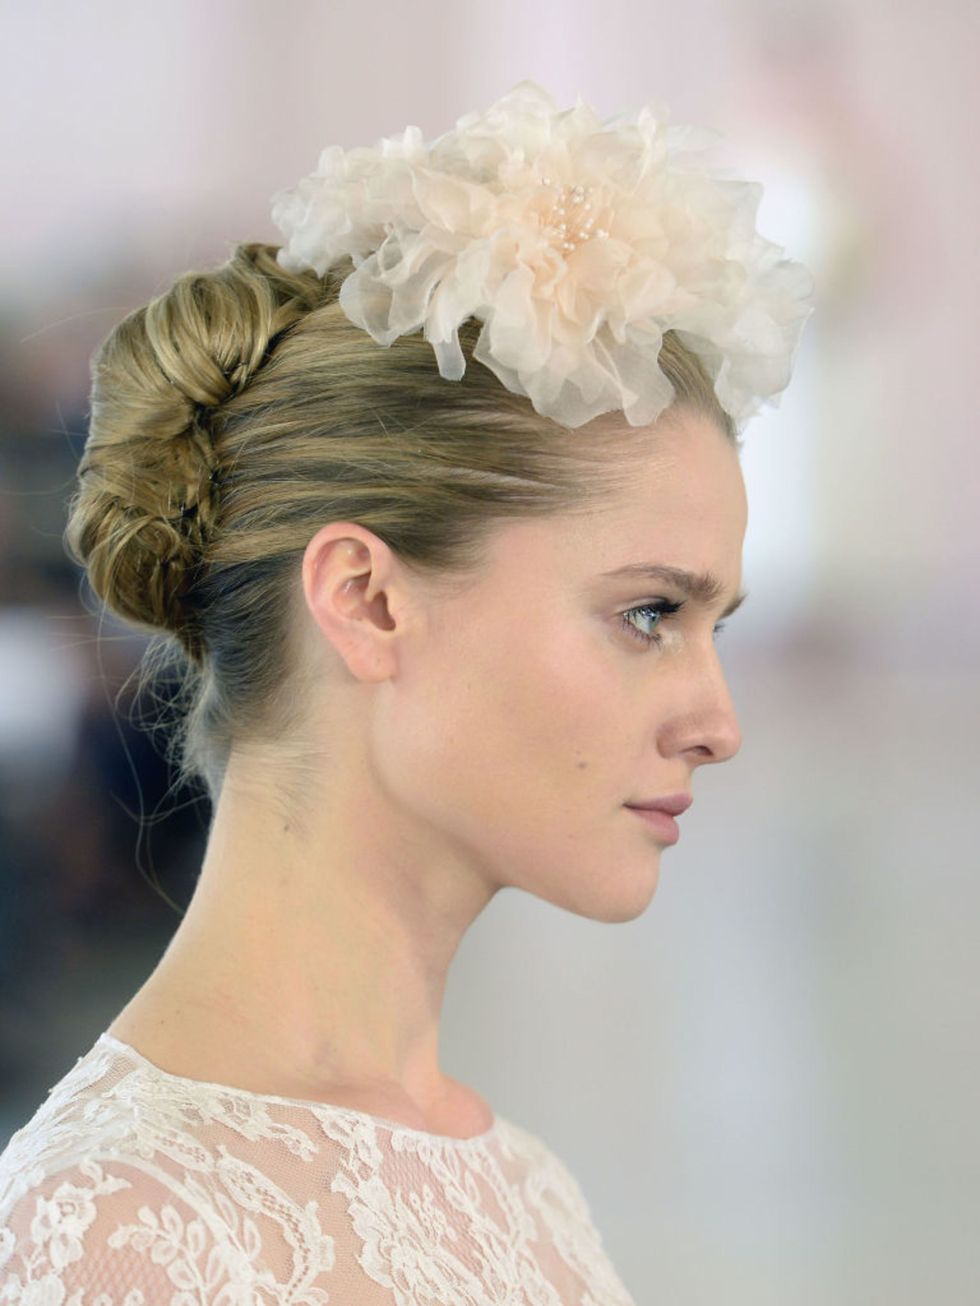 Oscar De La Renta brought back the French twist and made it modern with an exaggerated tulle fascinator